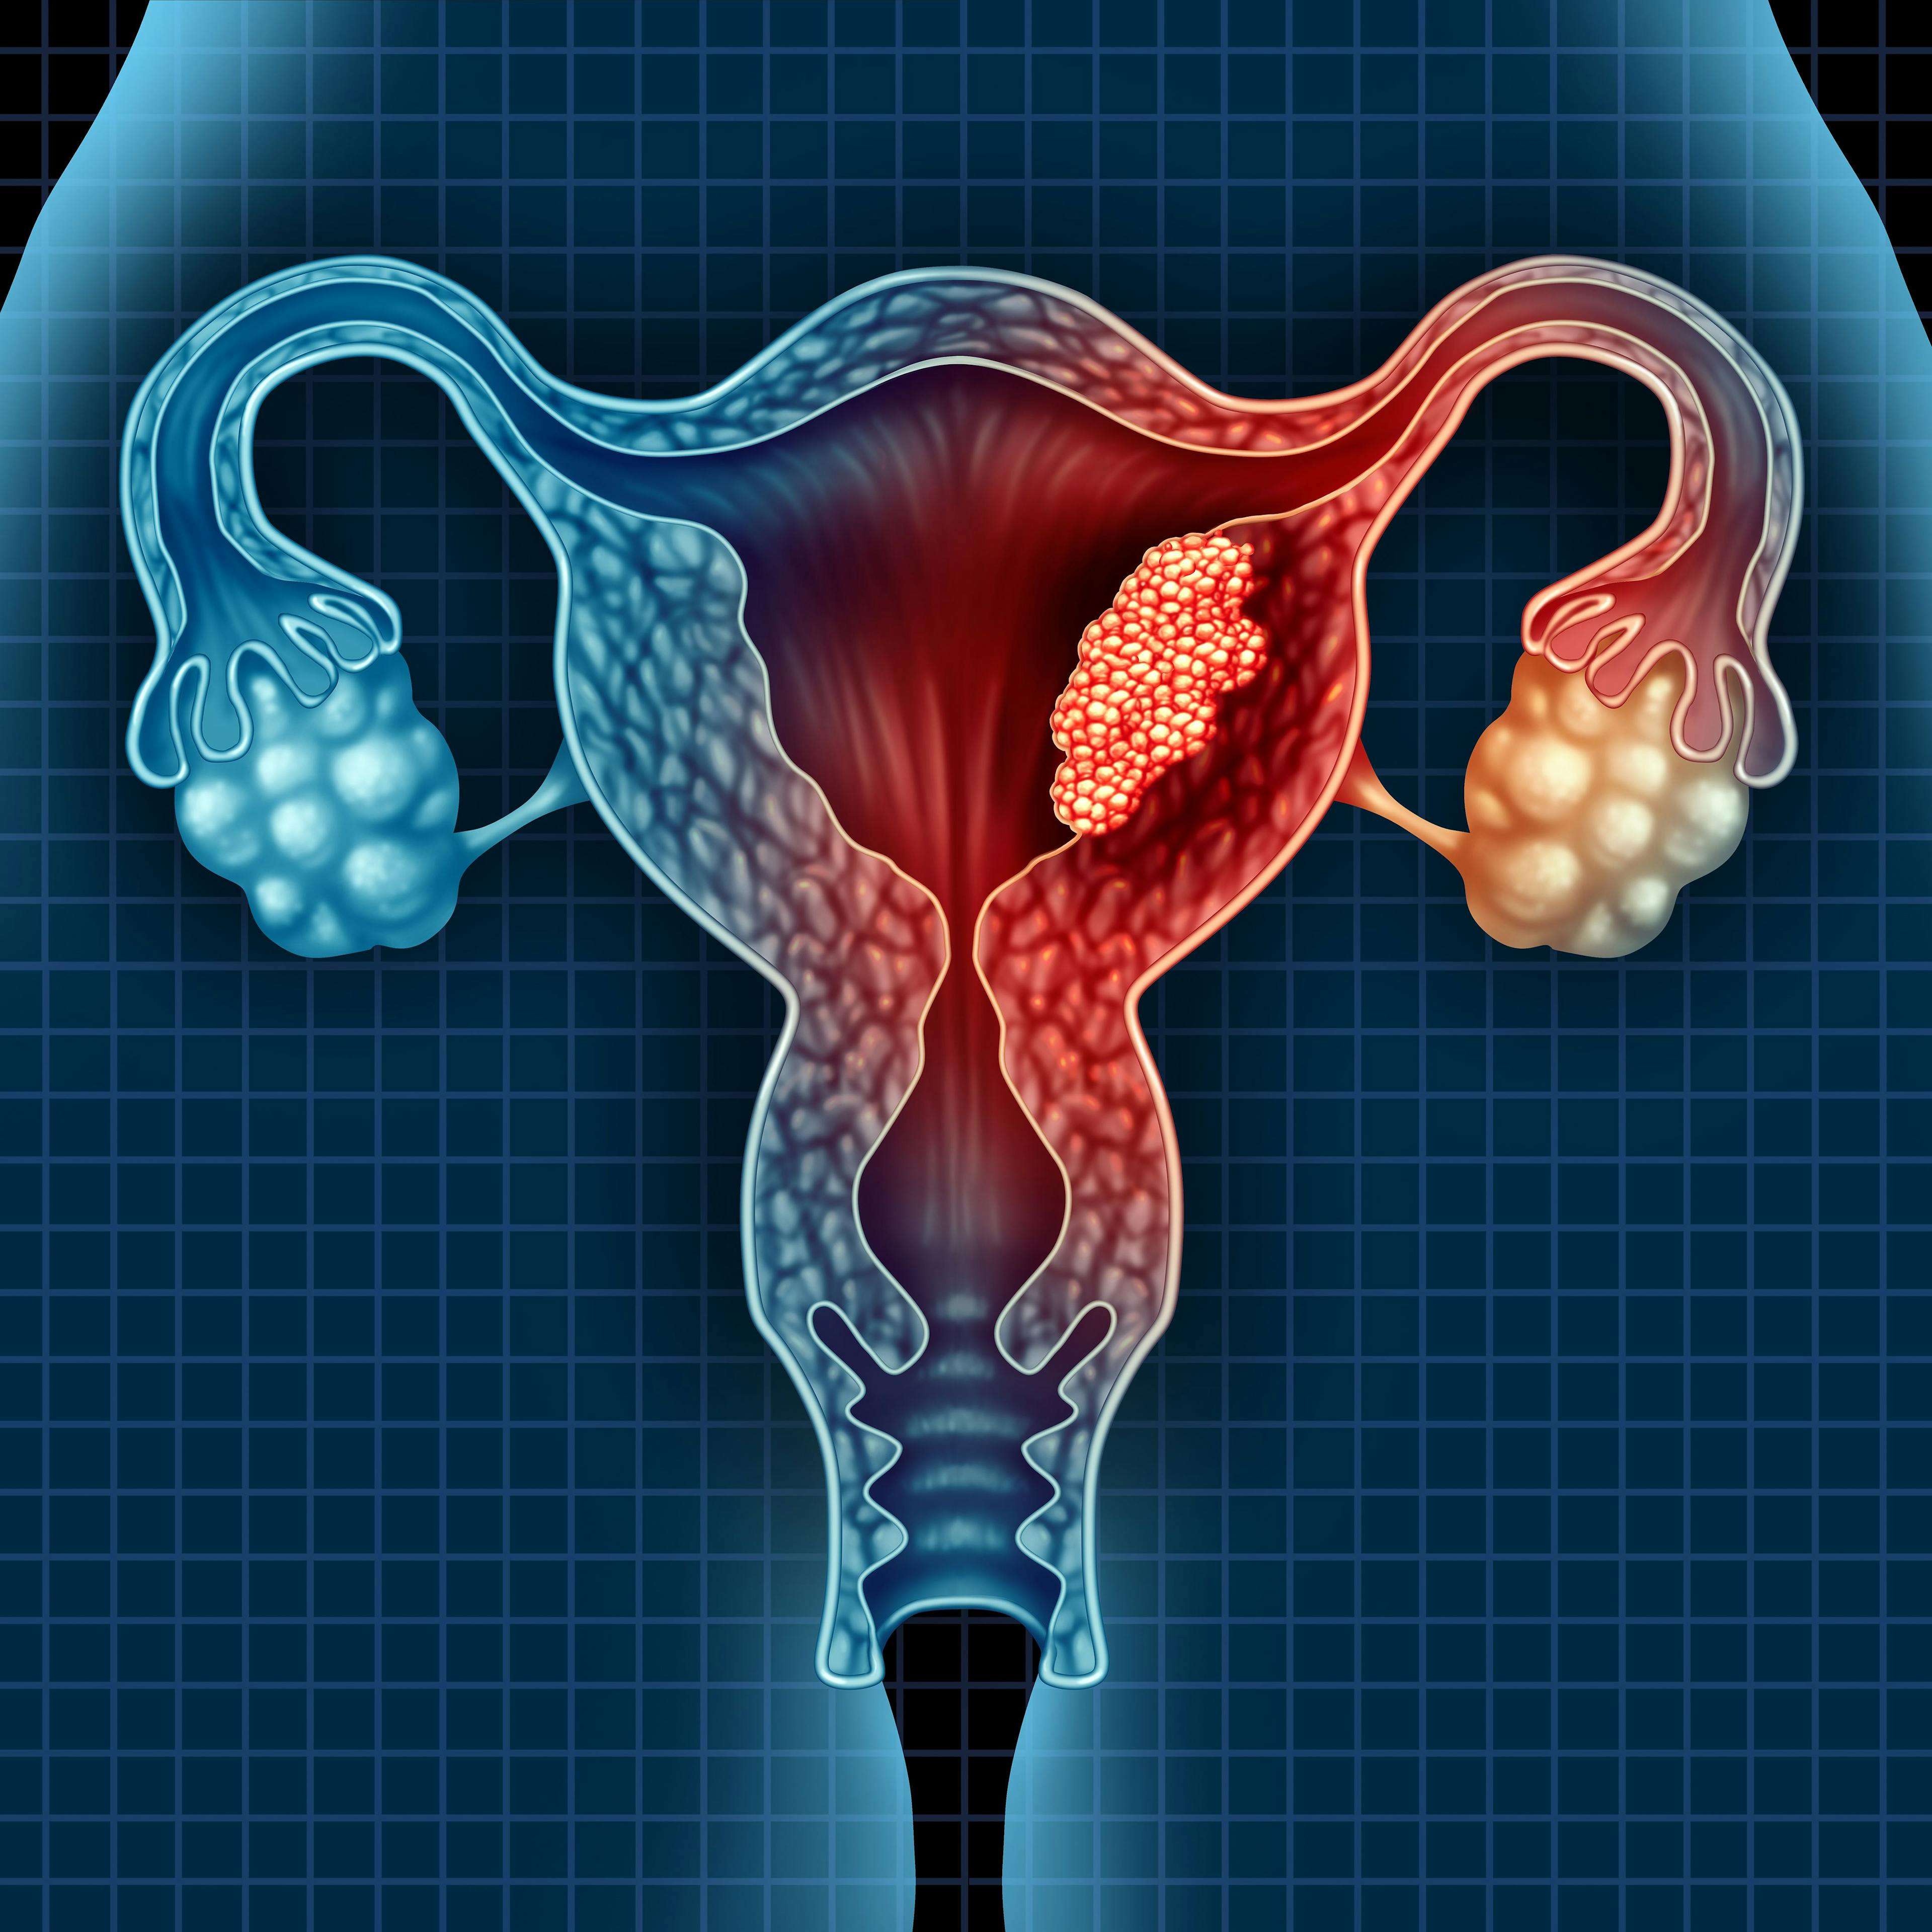 Stereotactic Hypofractionated Radiation Therapy Well Tolerated in Uterine Cancer